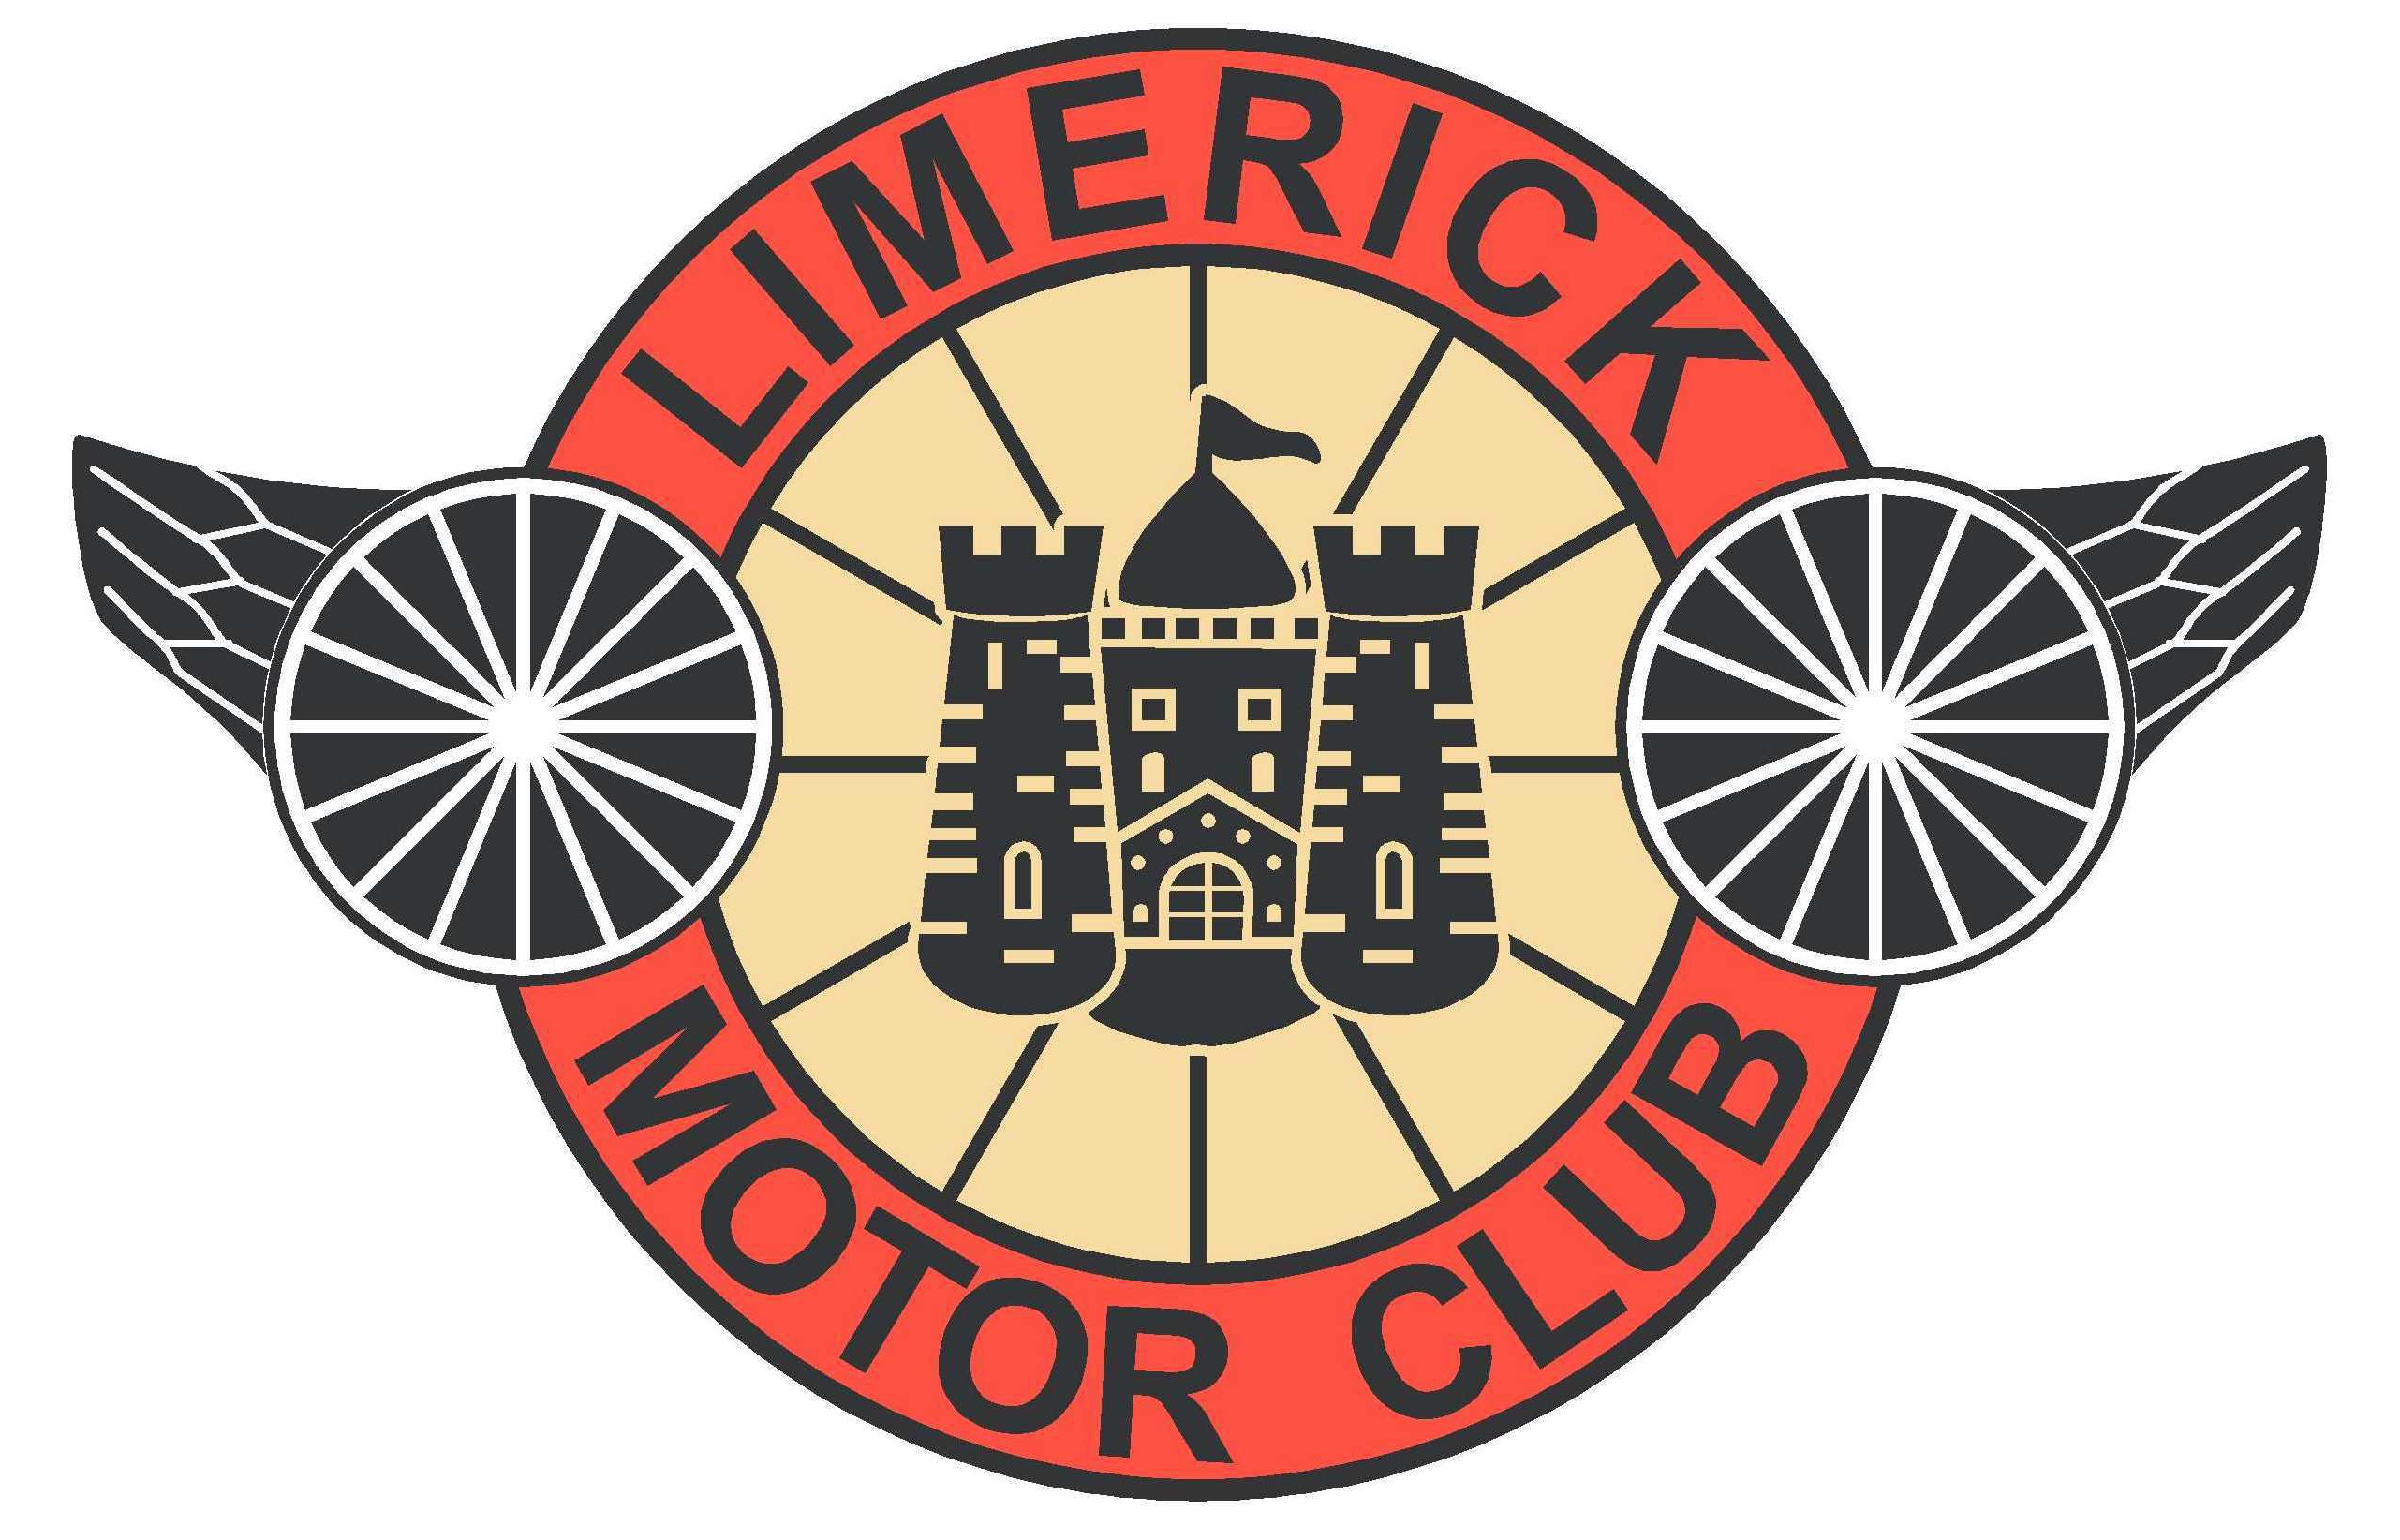 Crest of Limerick Motor first used in 2011